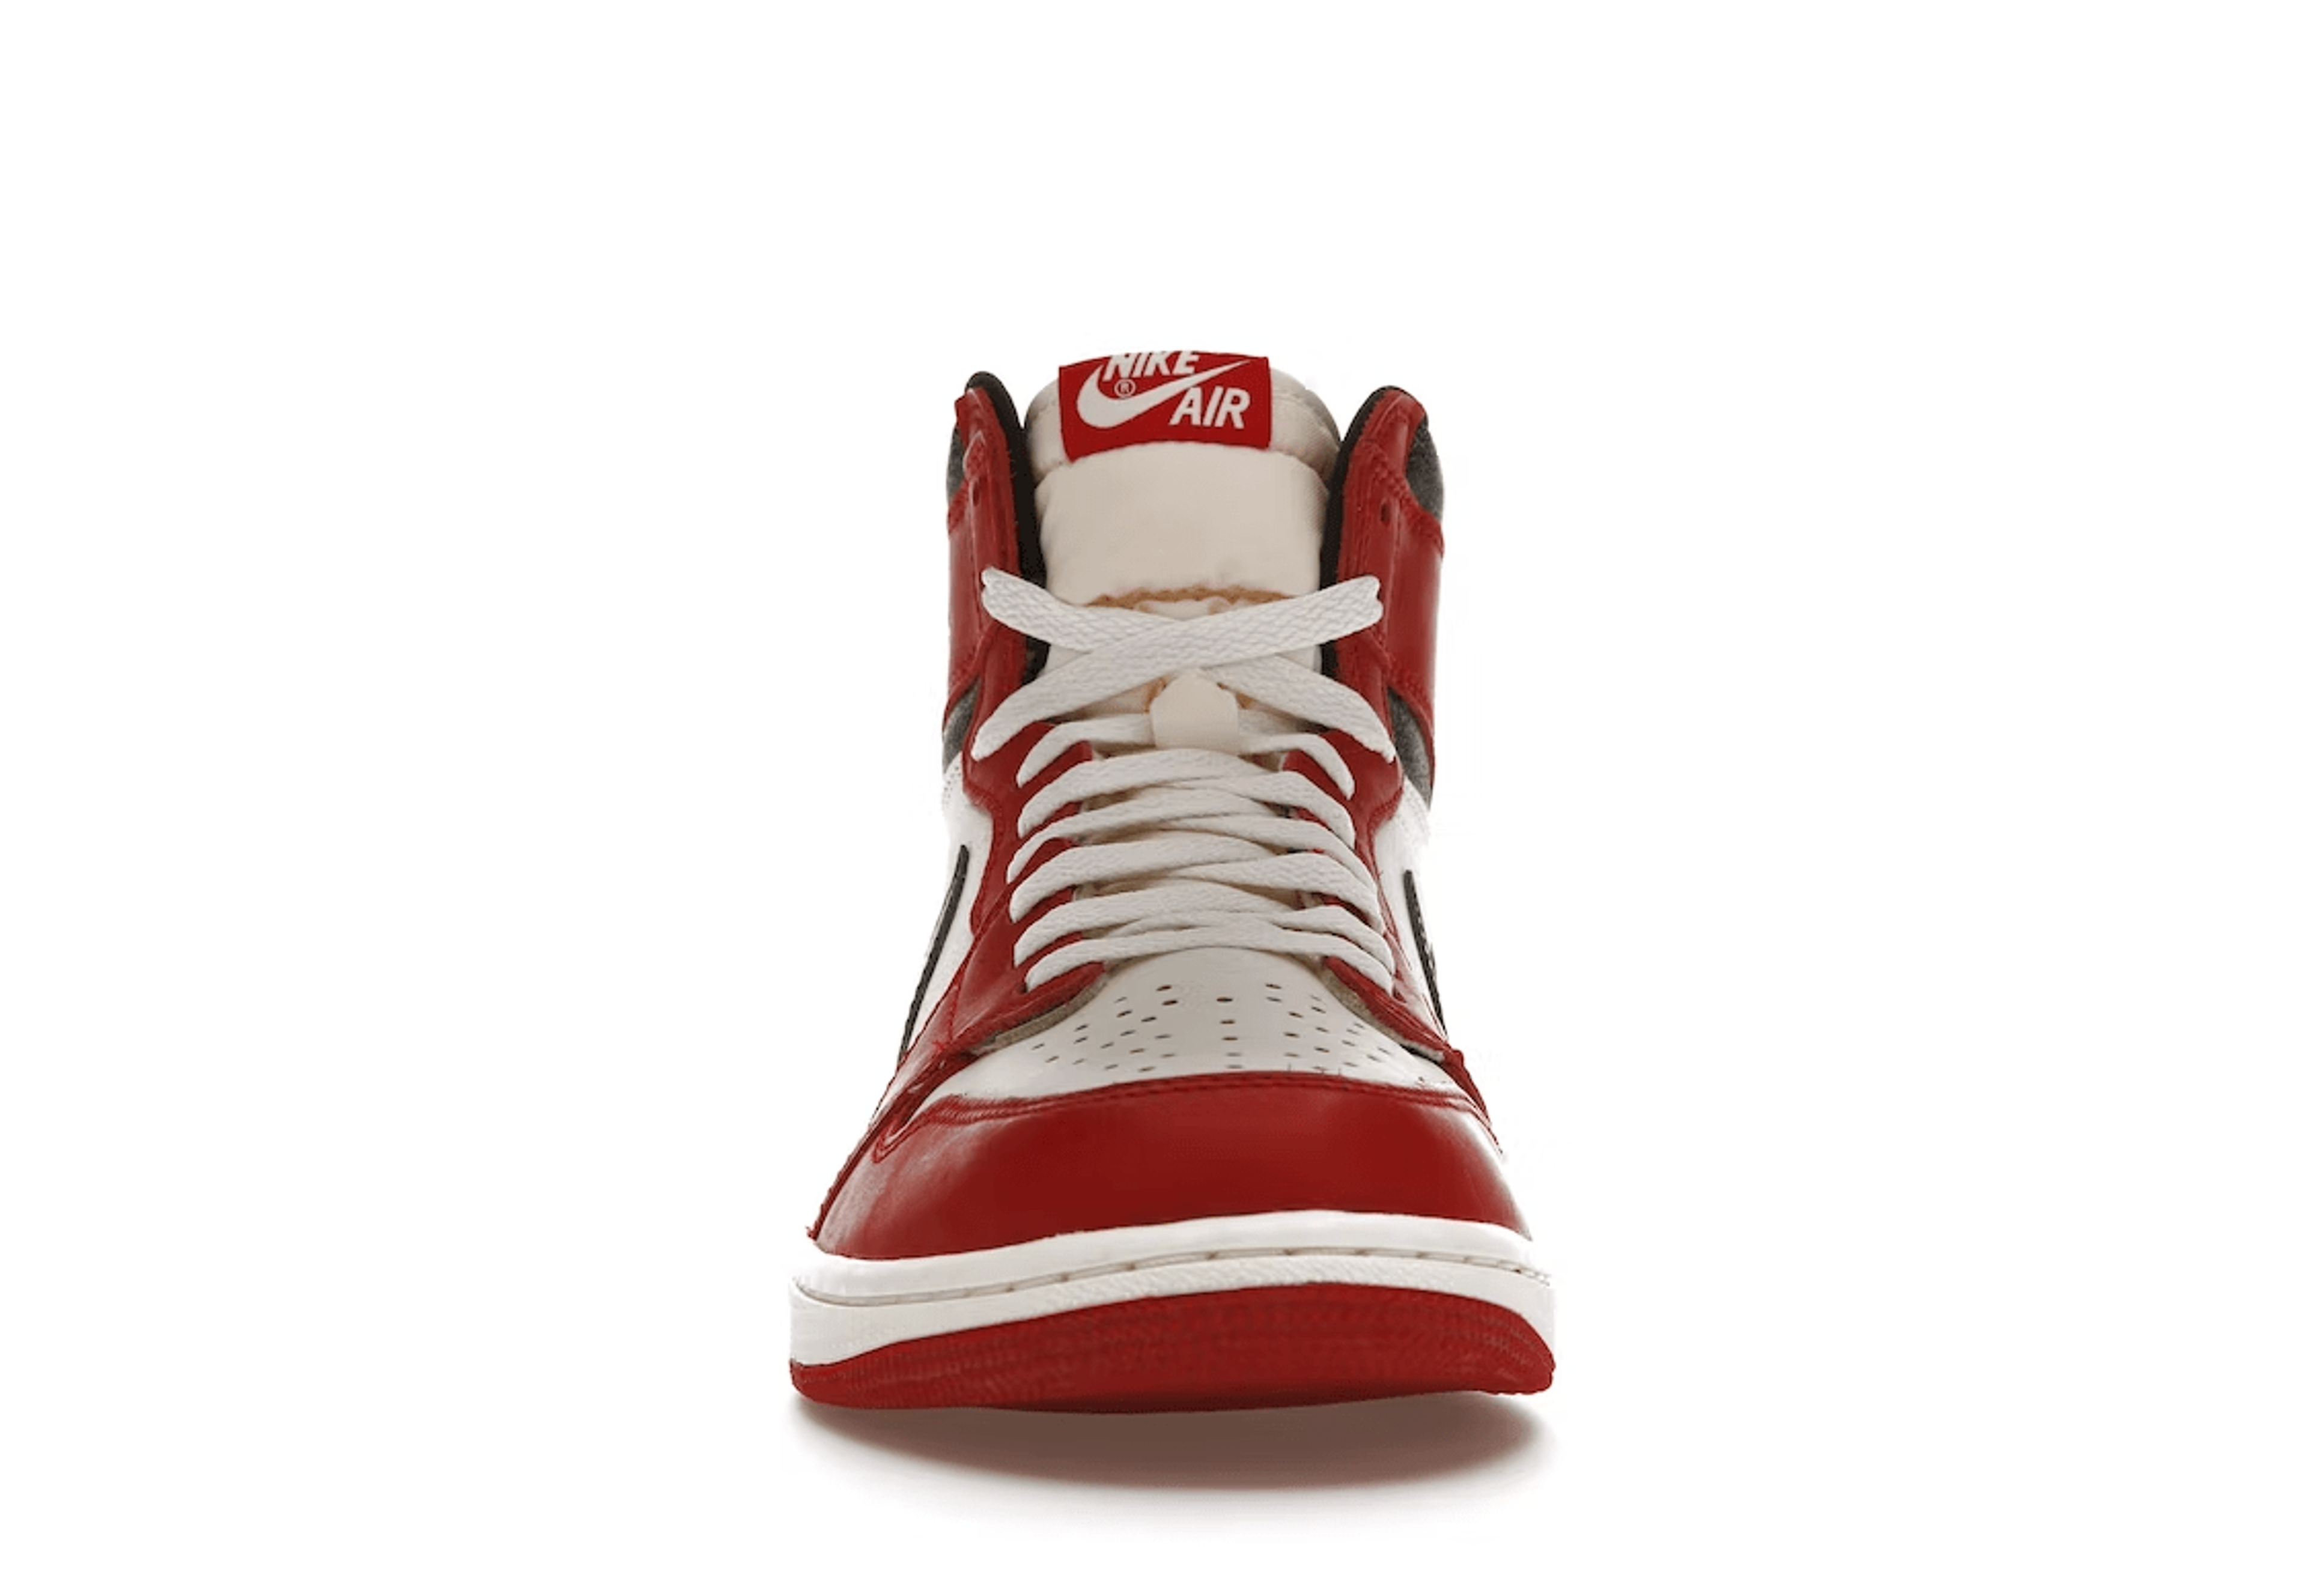 Alternate View 2 of Air Jordan 1 Retro High OG Lost and Found